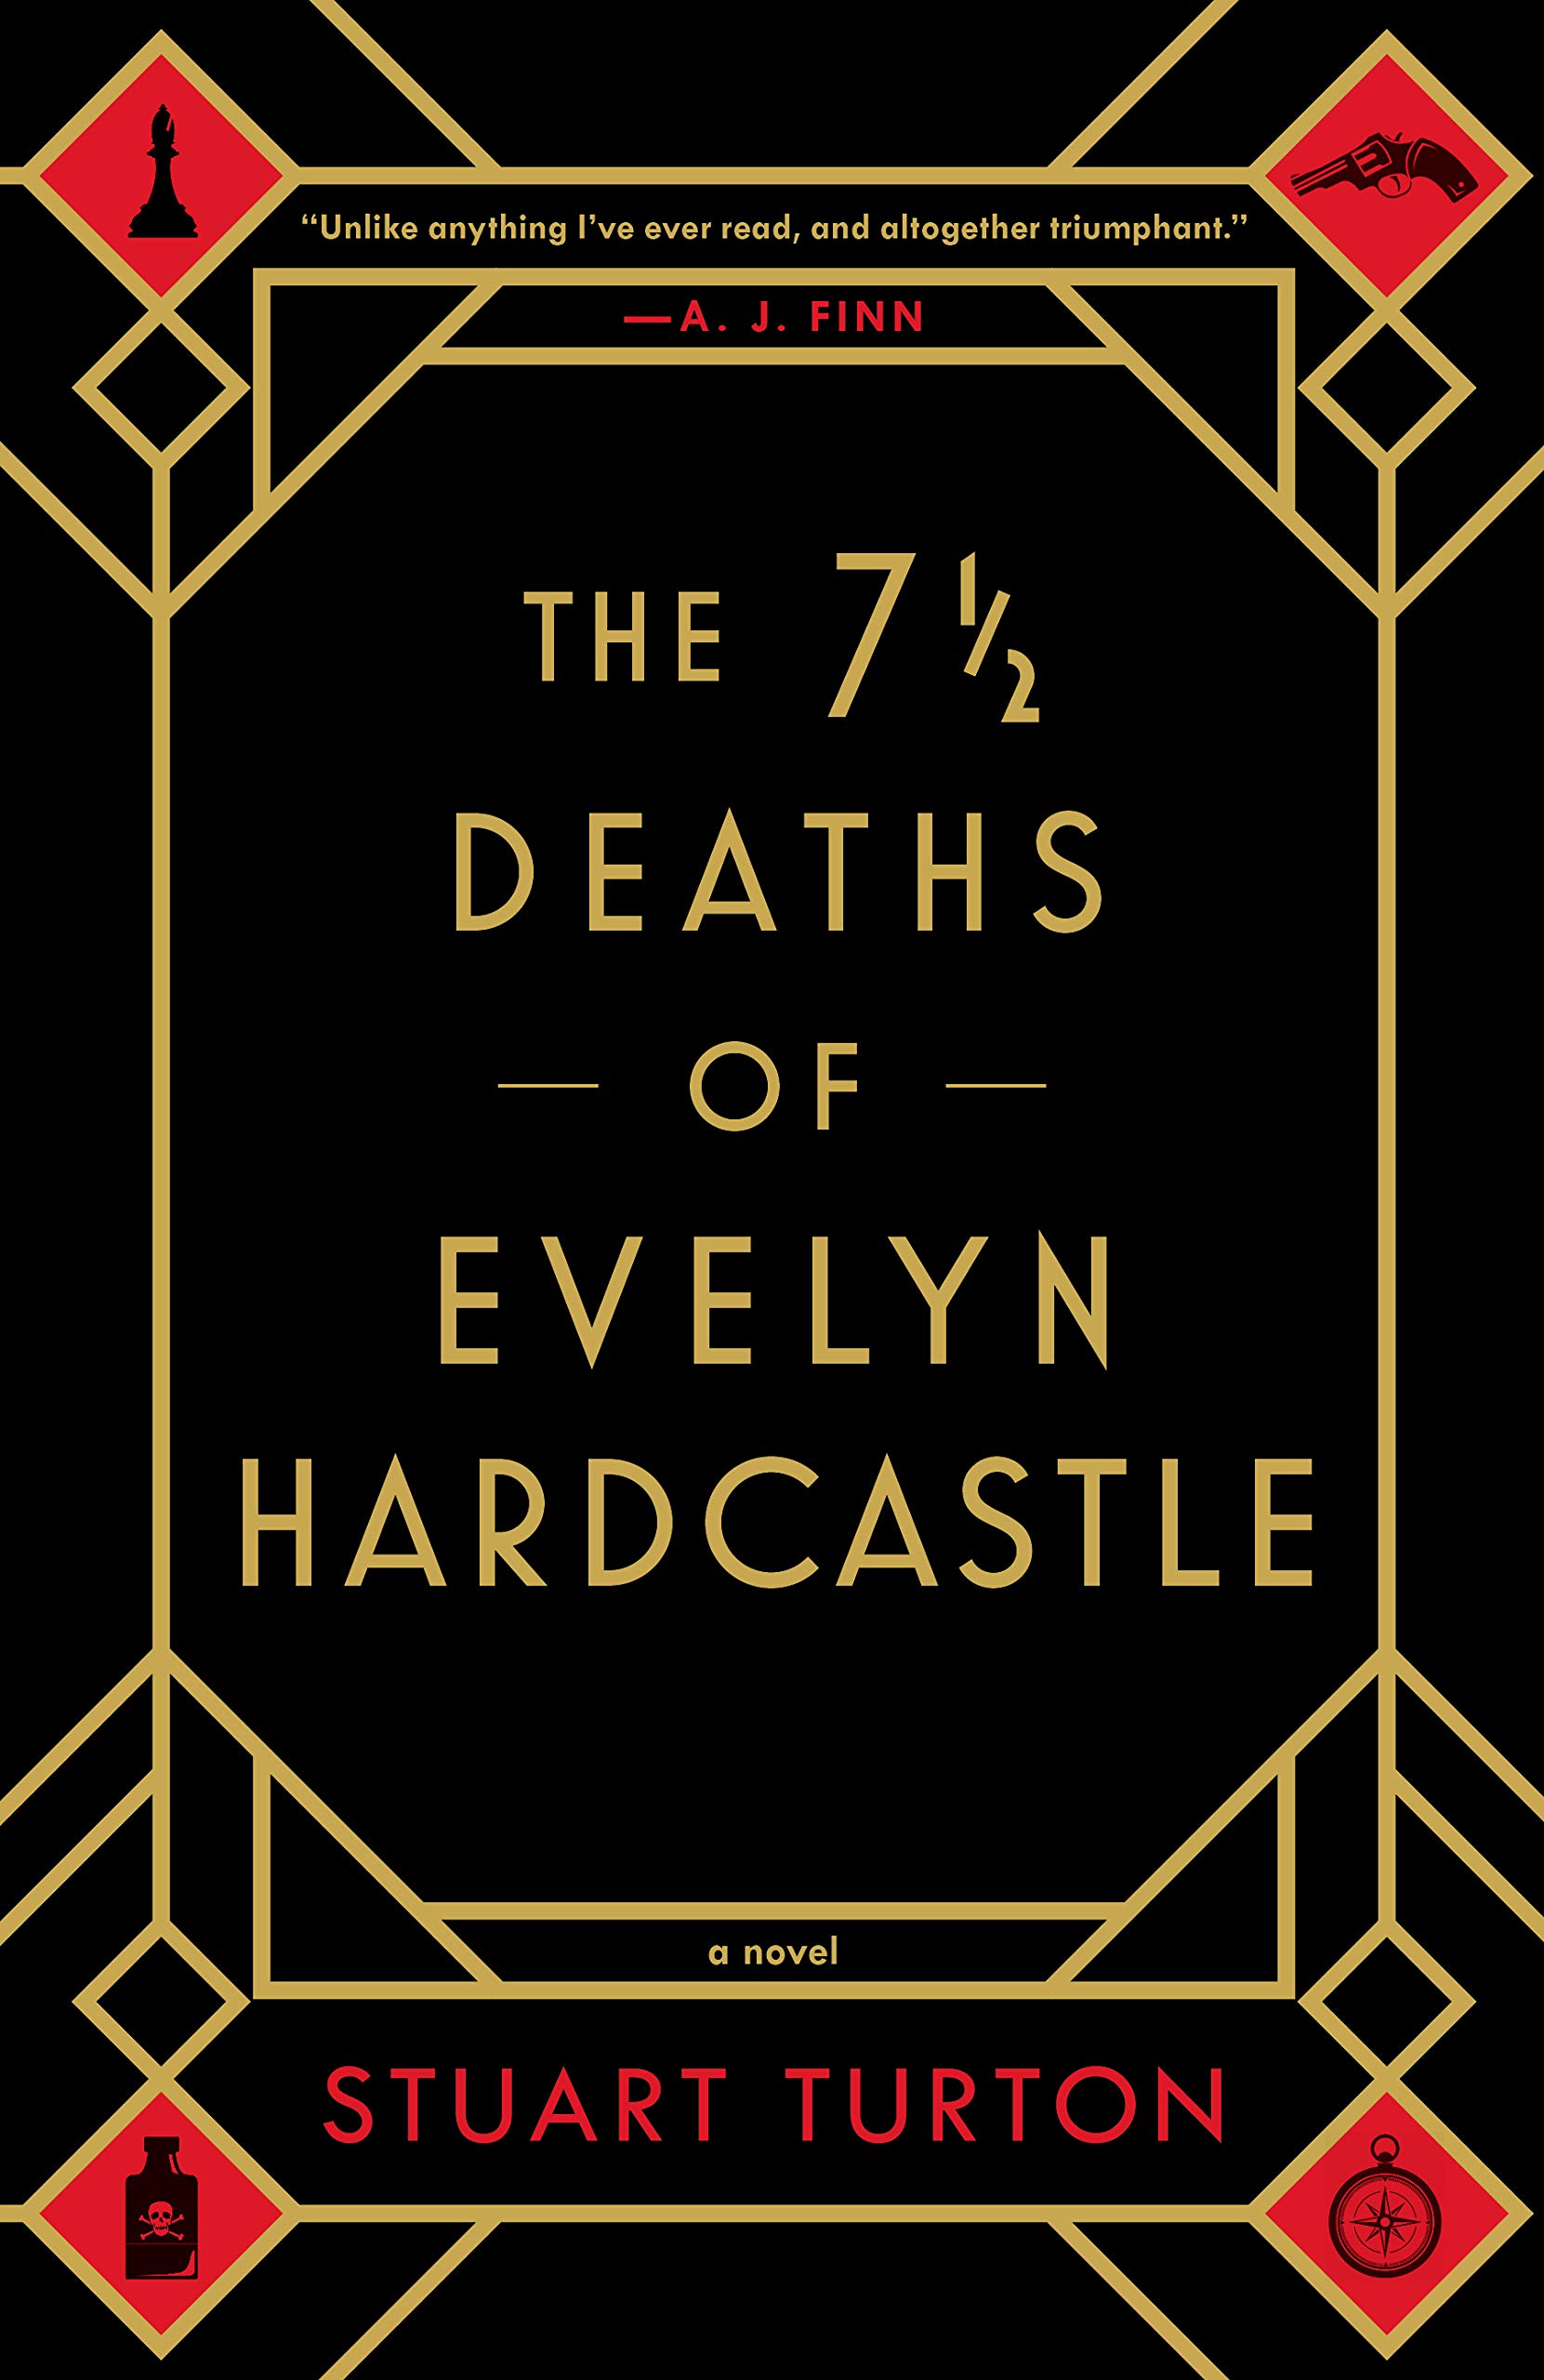 cover of the 7 1/2 Deaths of Evelyn Hardcastle by Stuart Turton